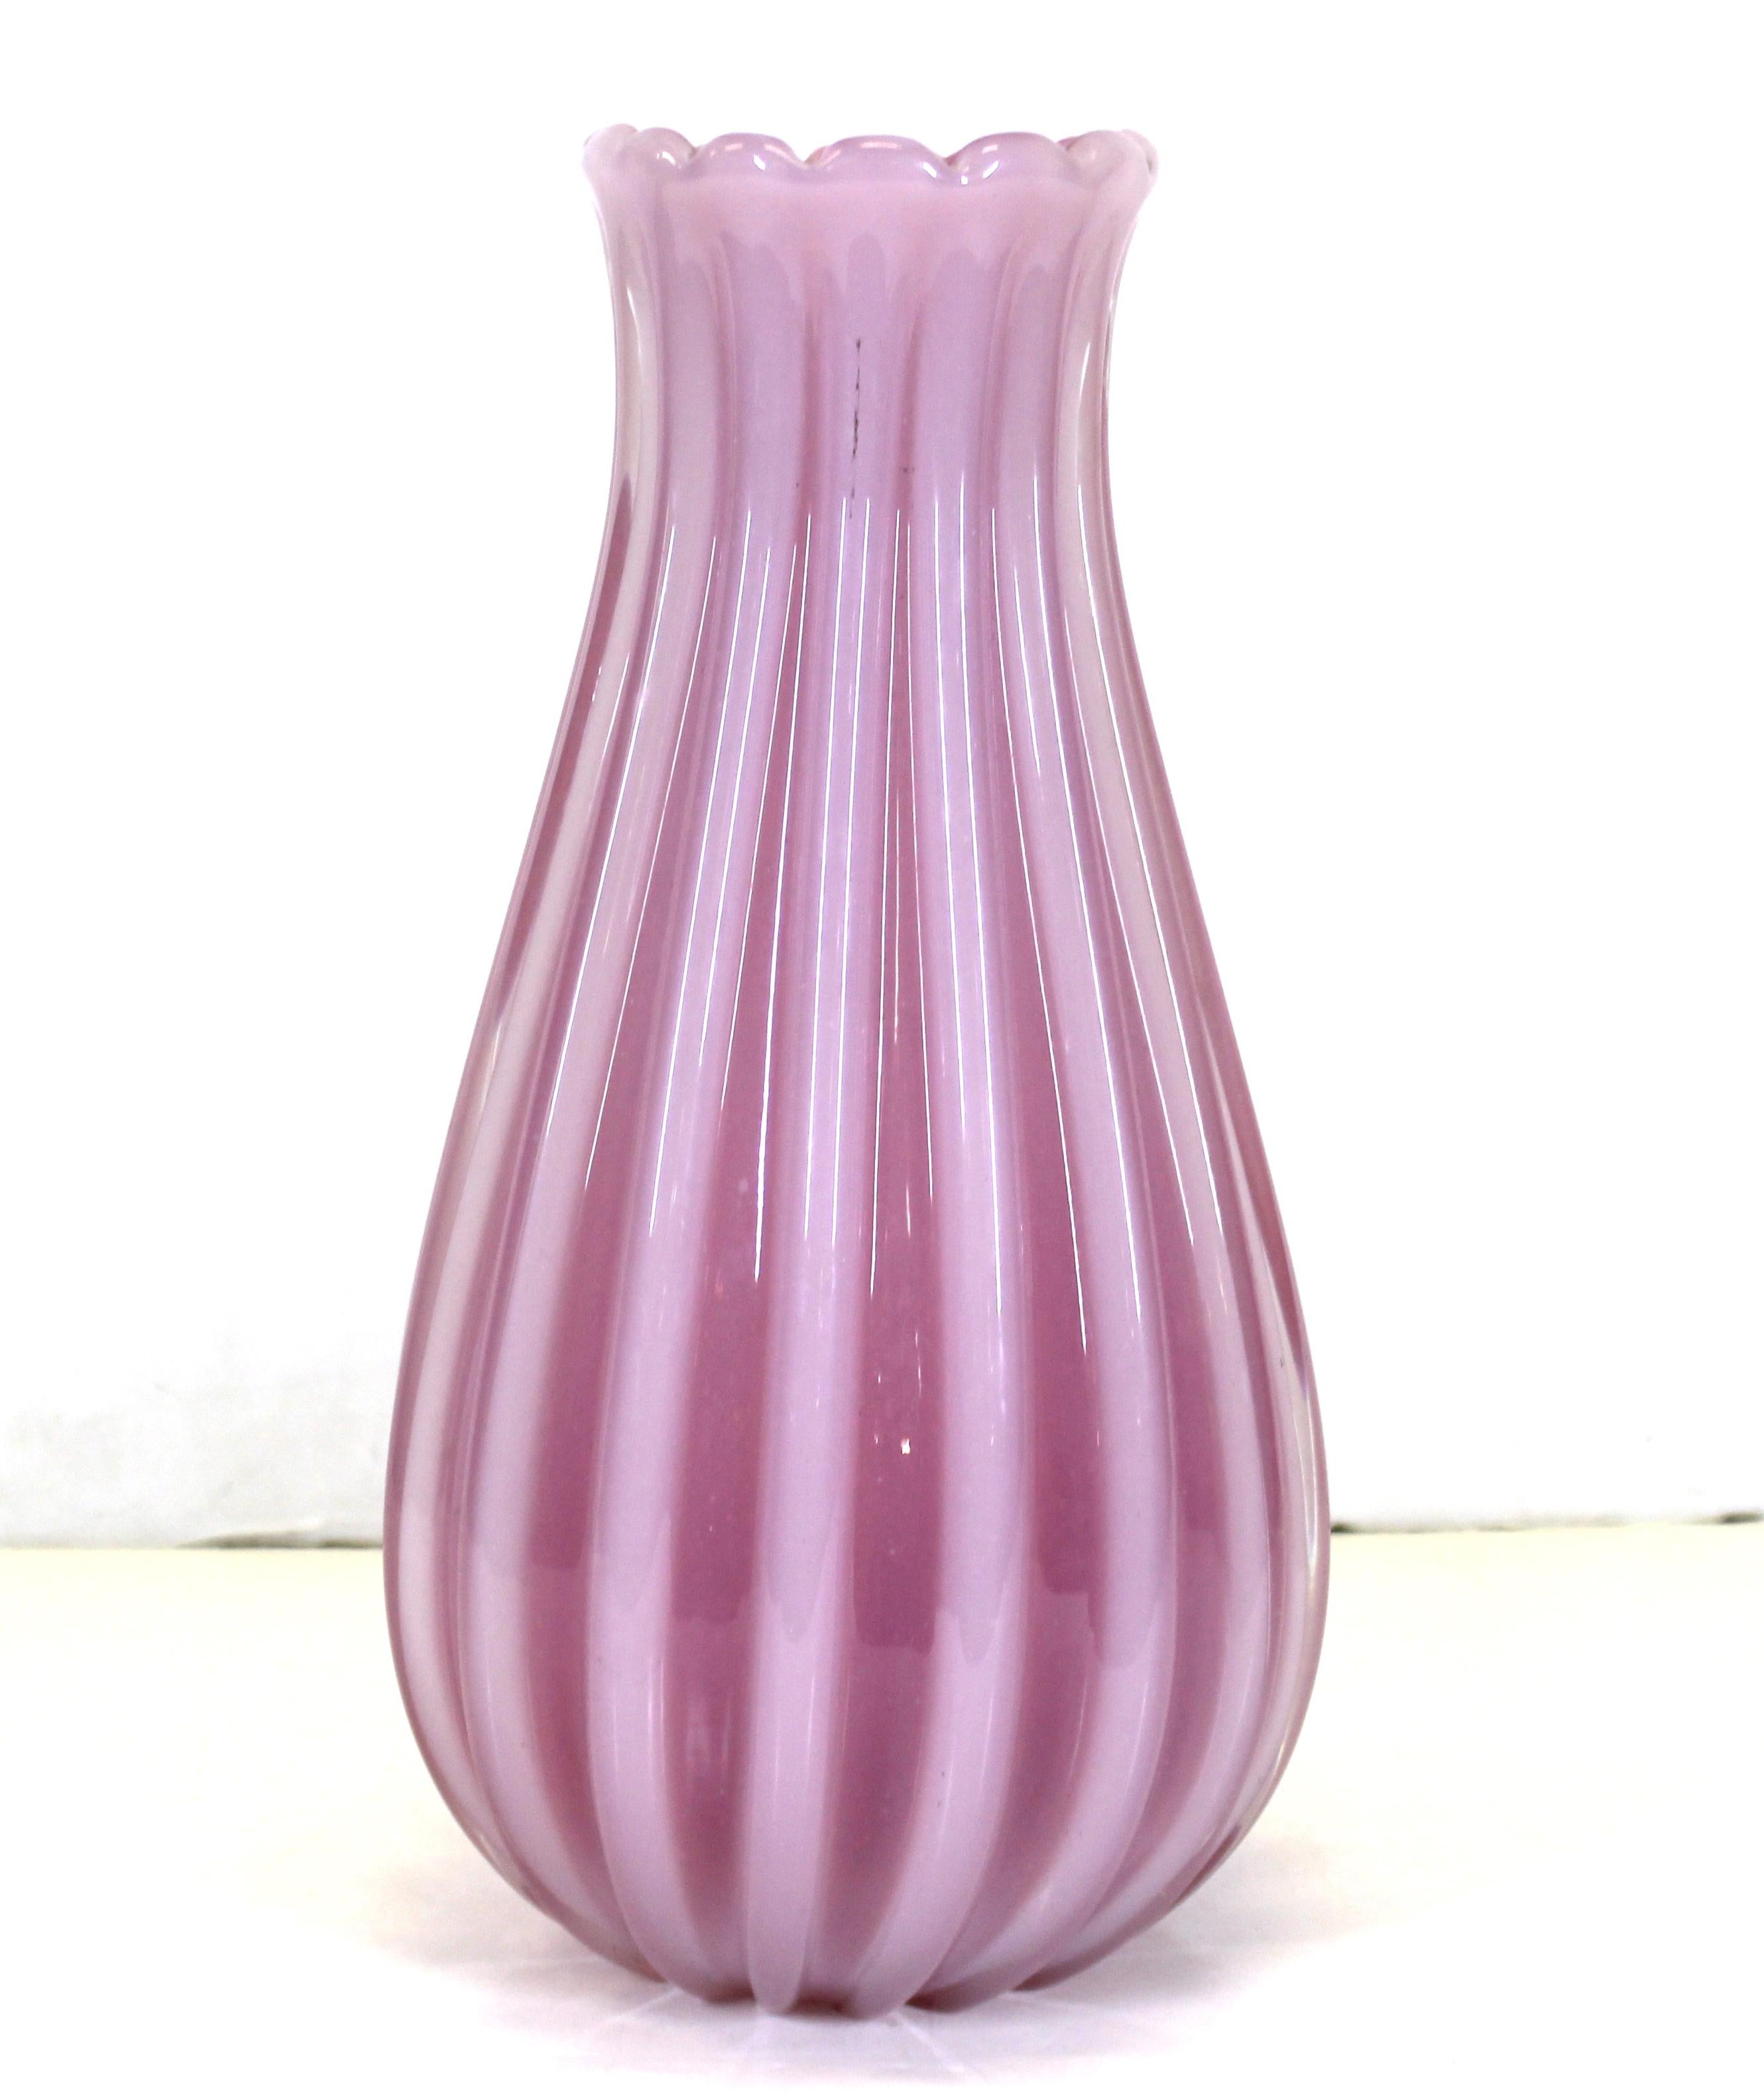 Italian Murano glass vase in pink channeled glass, created by Archimede Seguso during the 1940s. The piece is in great vintage condition with age-appropriate wear.